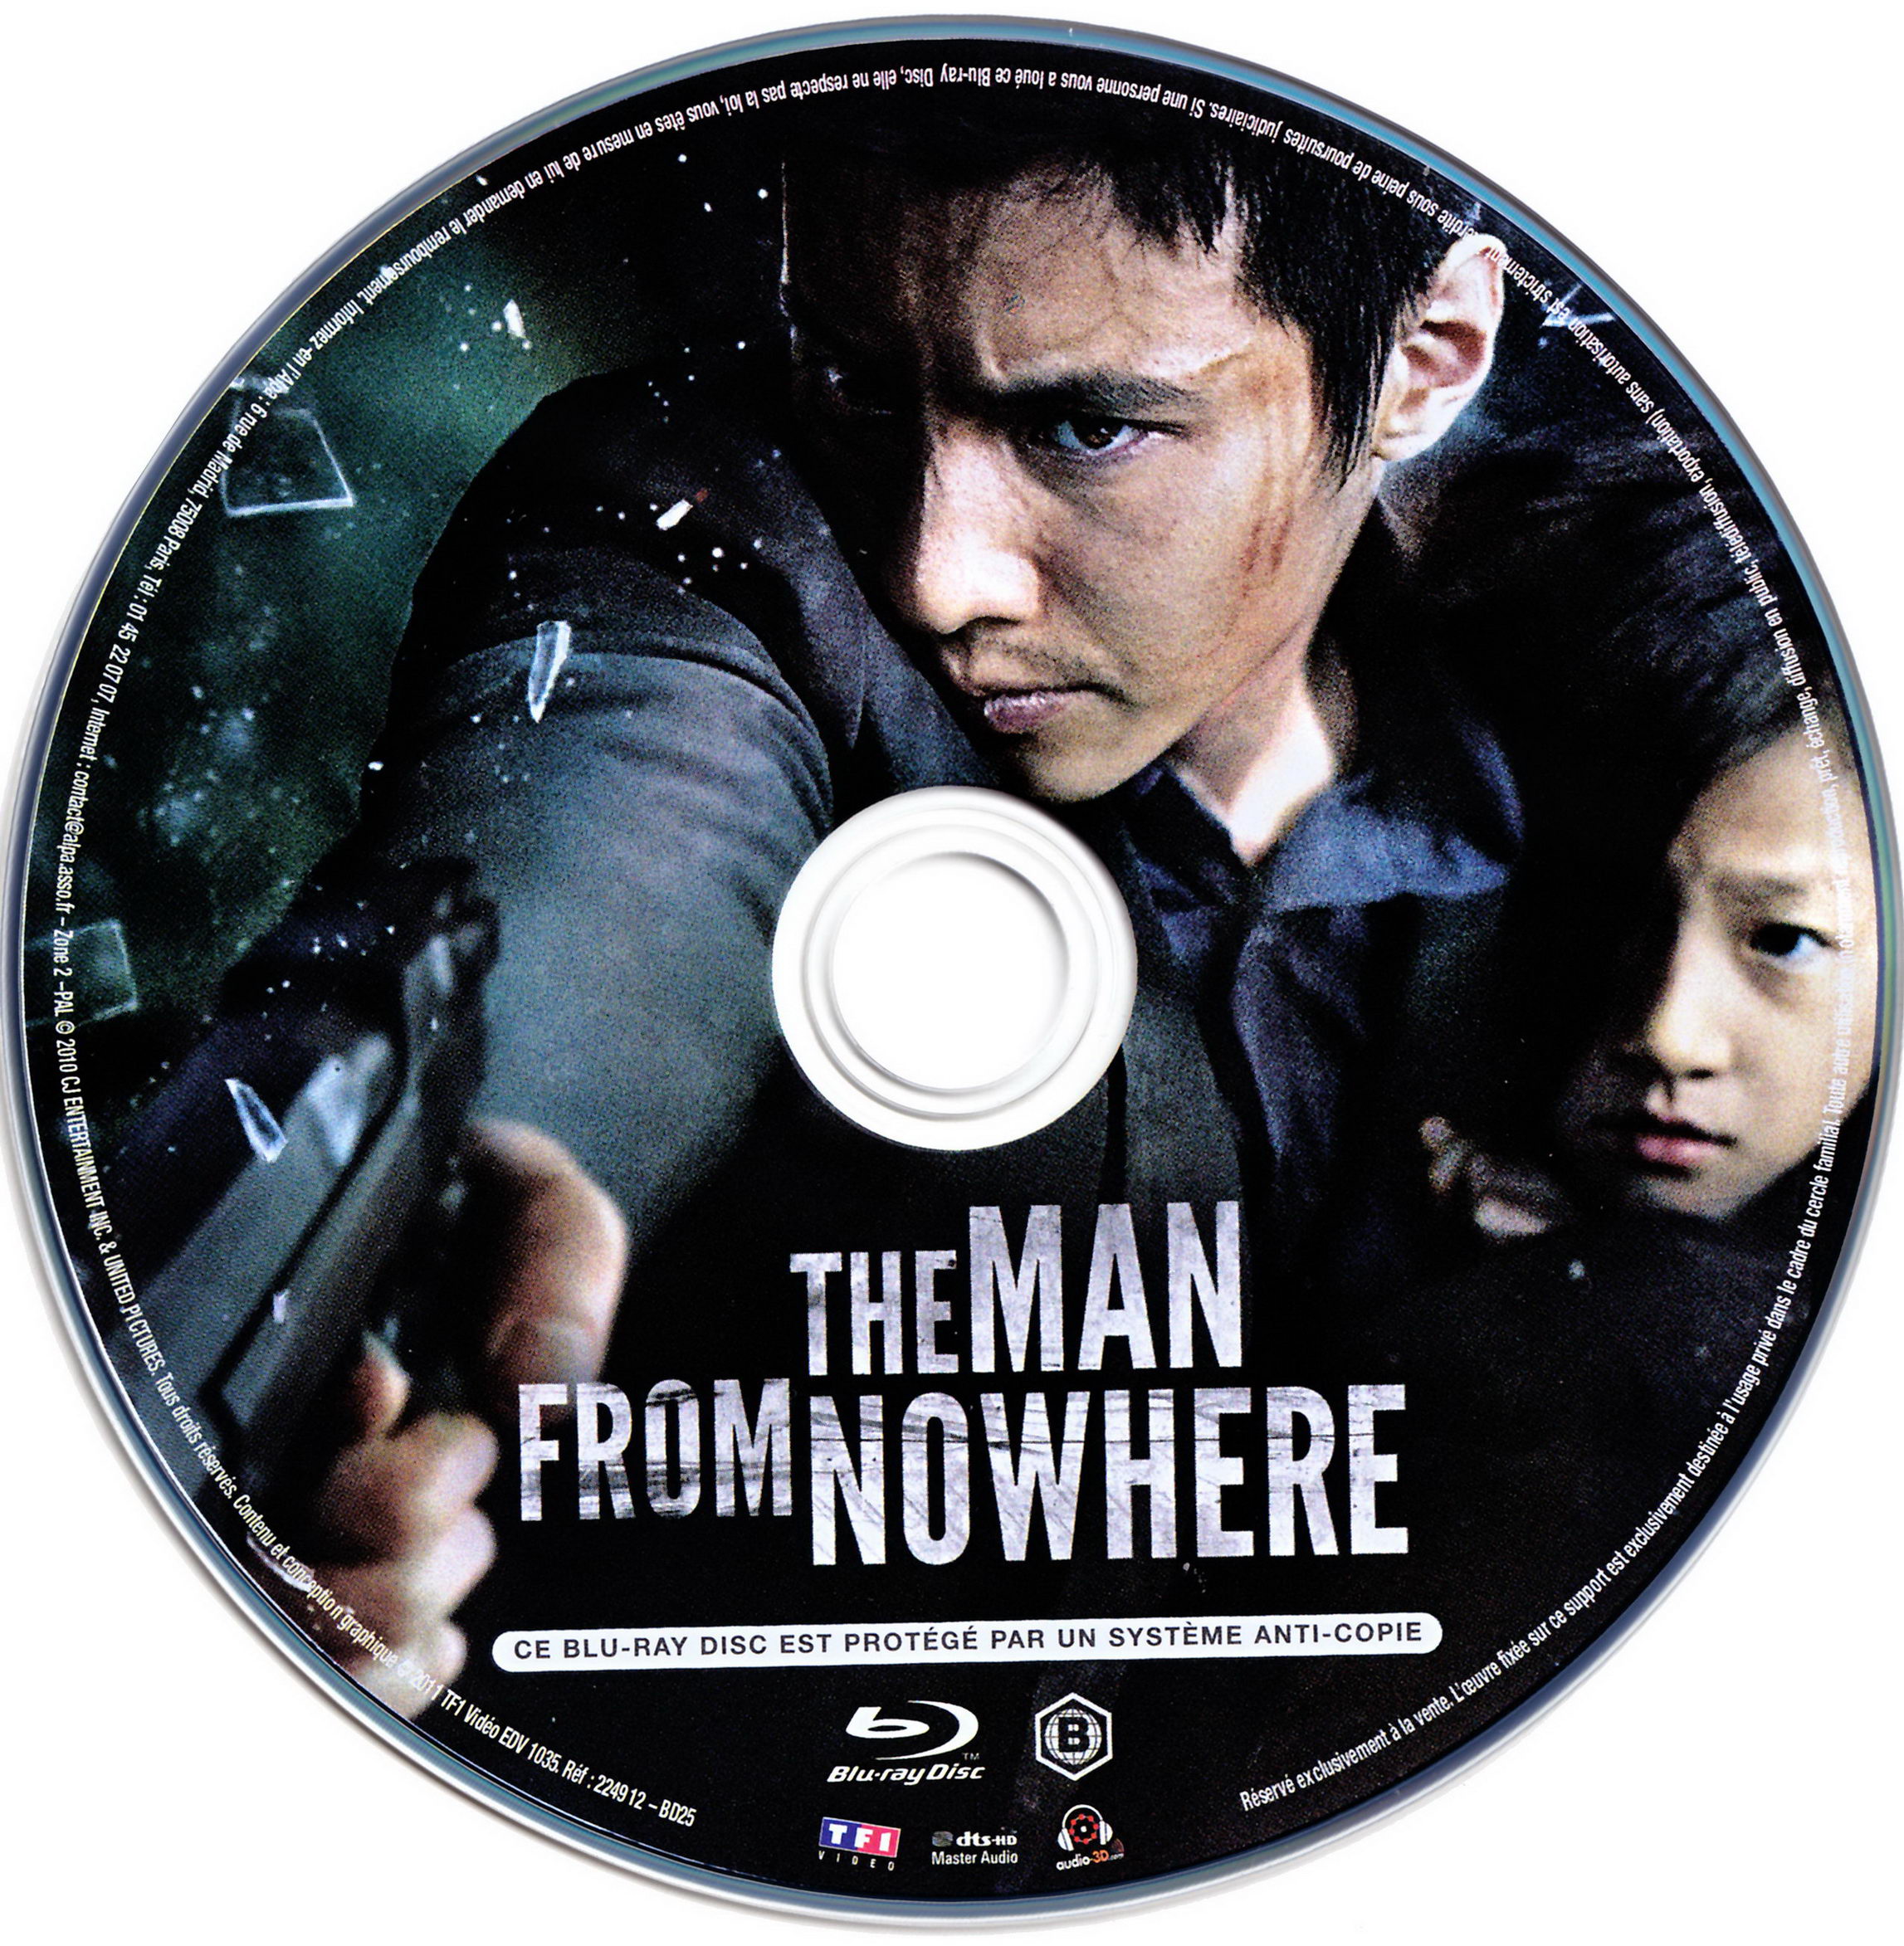 The man from nowhere (BLU-RAY)